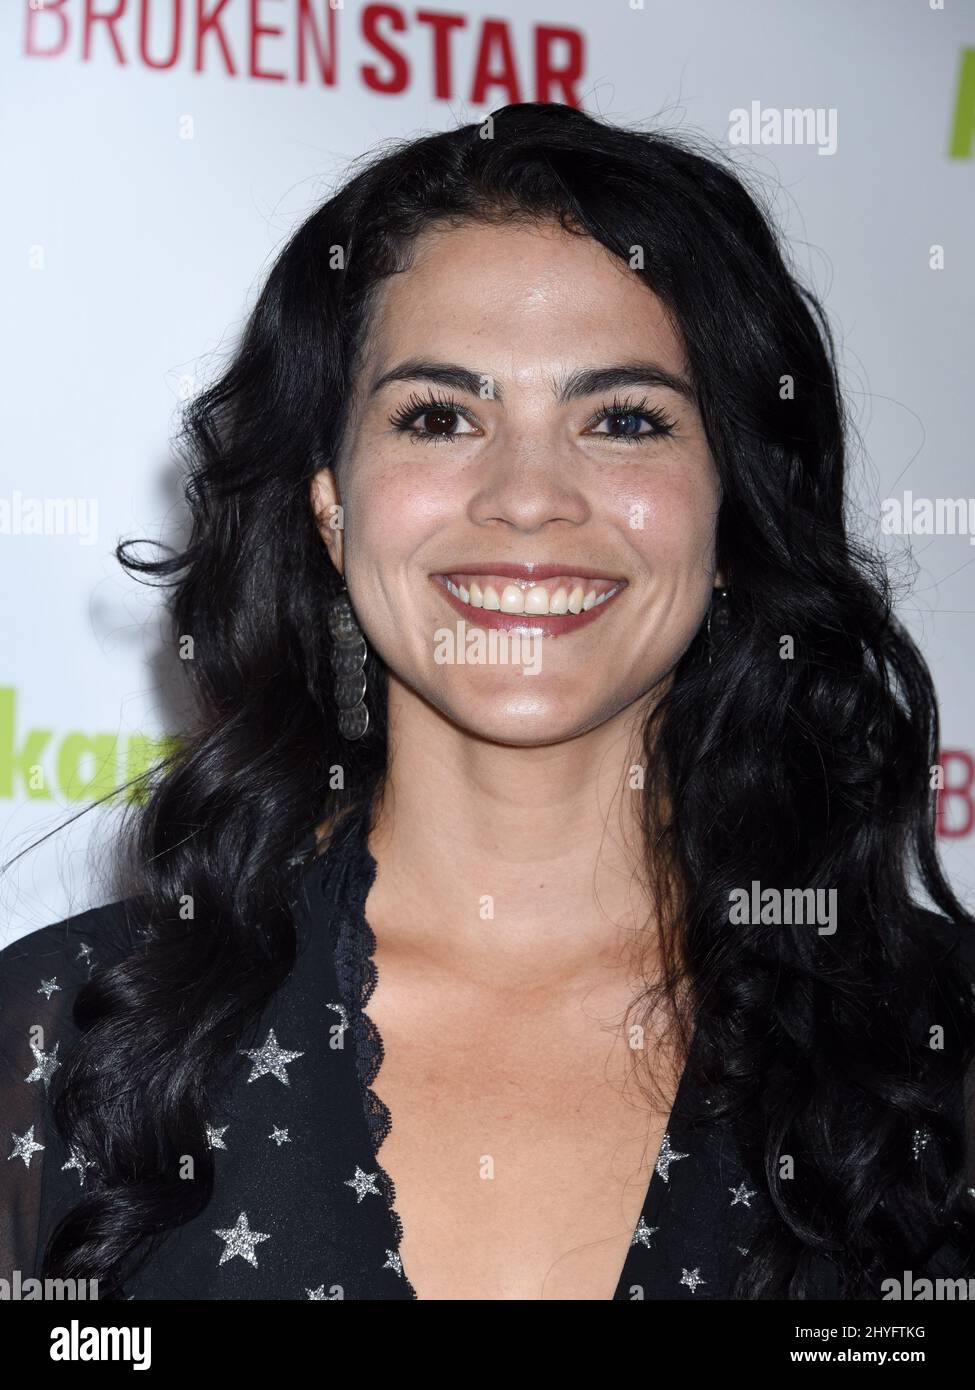 Silvia Tovar at the 'Broken Star' Los Angeles Premiere held at the TCL Chinese 6 Theatres on July 18, 2018 in Hollywood, Ca. Stock Photo